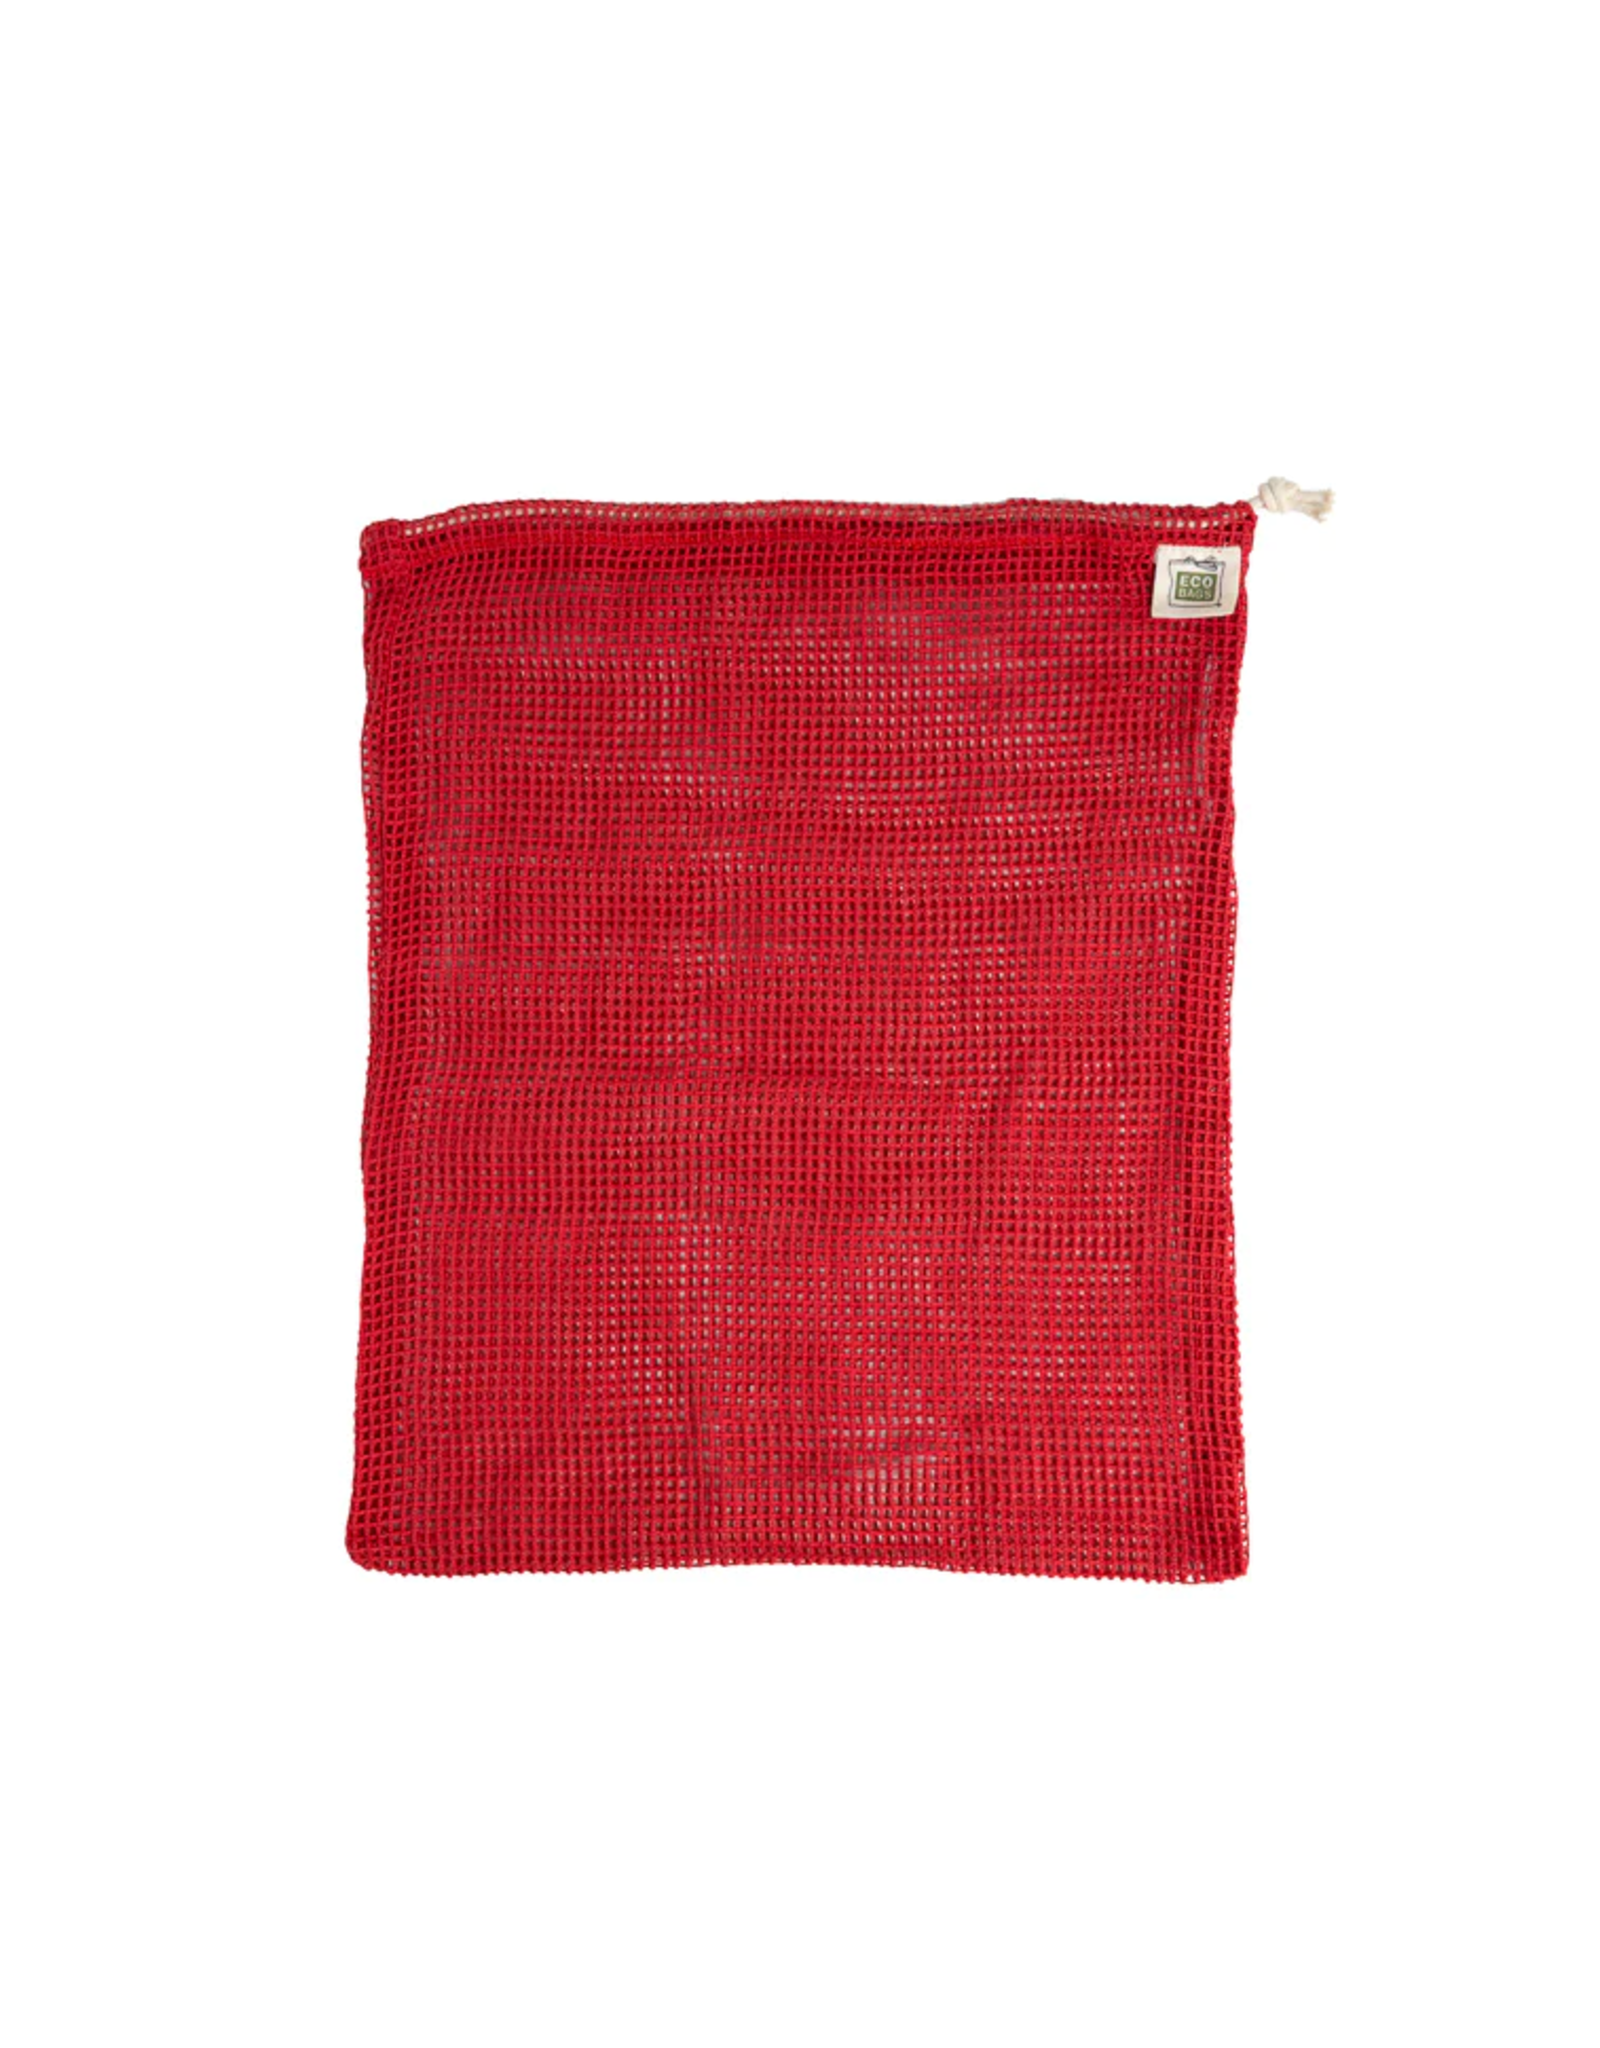 Organic Cotton Net Produce Bags Large- 12" x 15" - Chili Red